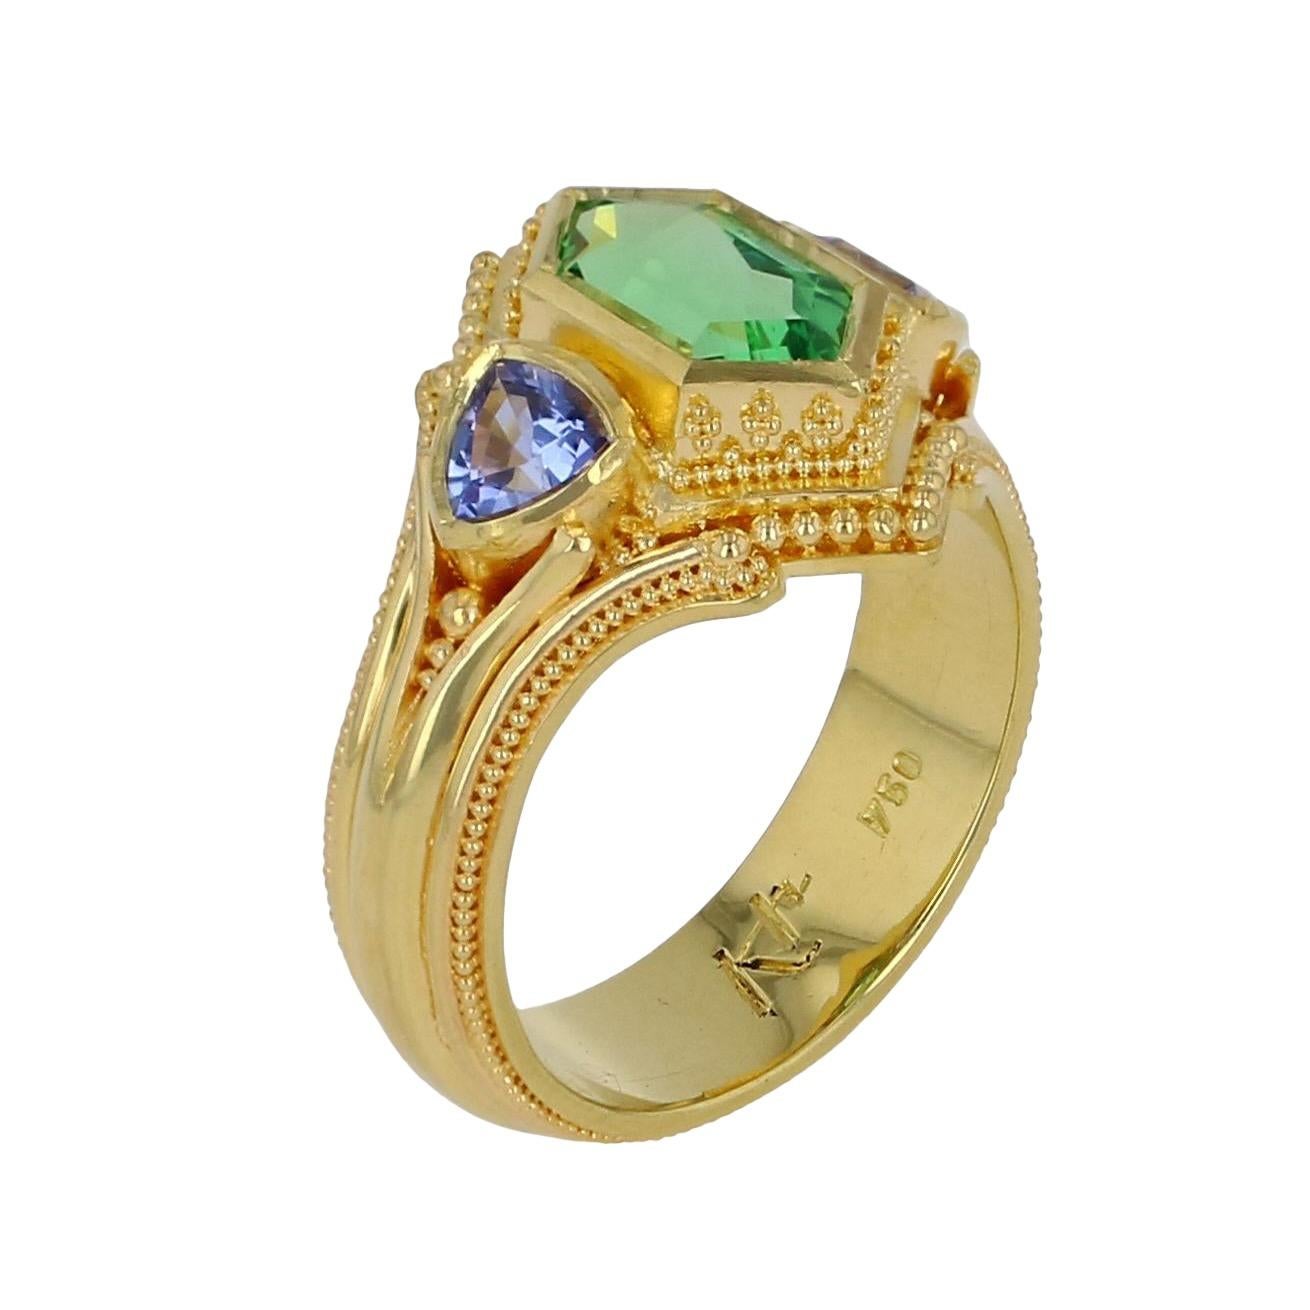 Kent Raible 18 karat Gold Tsavorite Garnet and Tanzanite Cocktail Ring In New Condition For Sale In Mossrock, WA